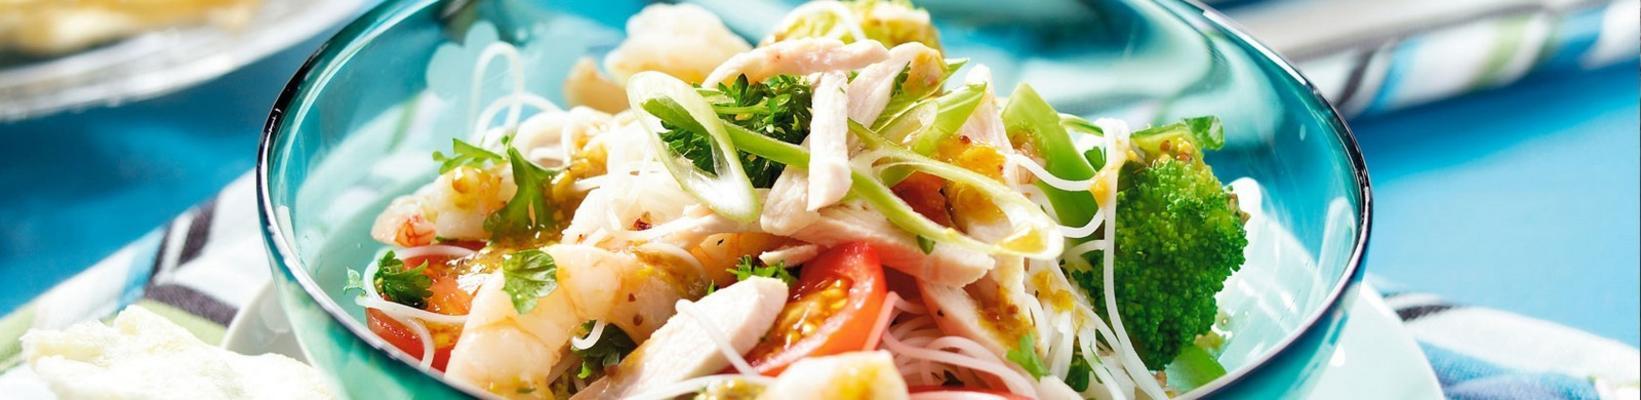 noodle salad with chicken and shrimps